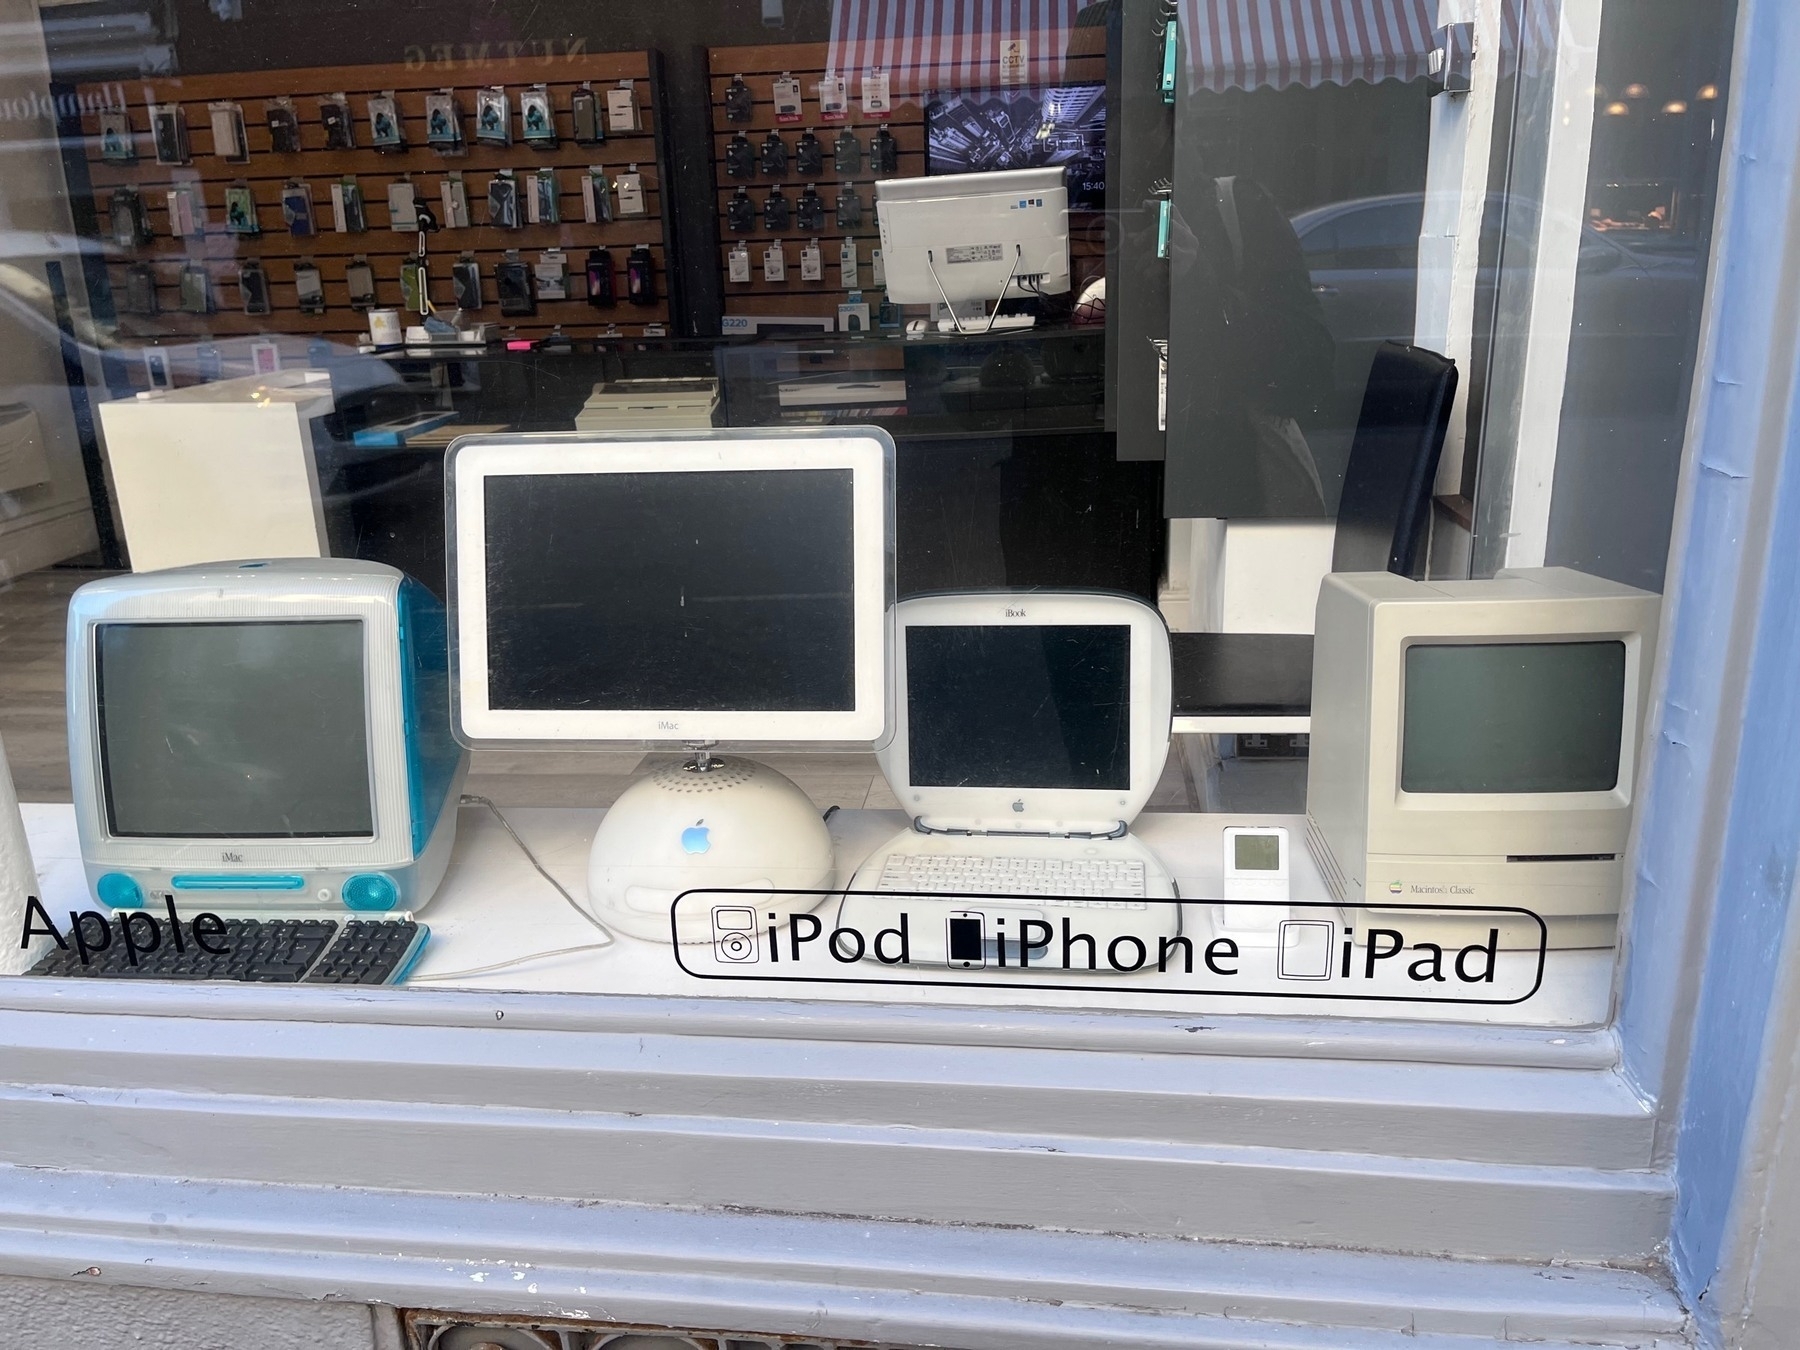 Old Apple computers and iPod in a shop window